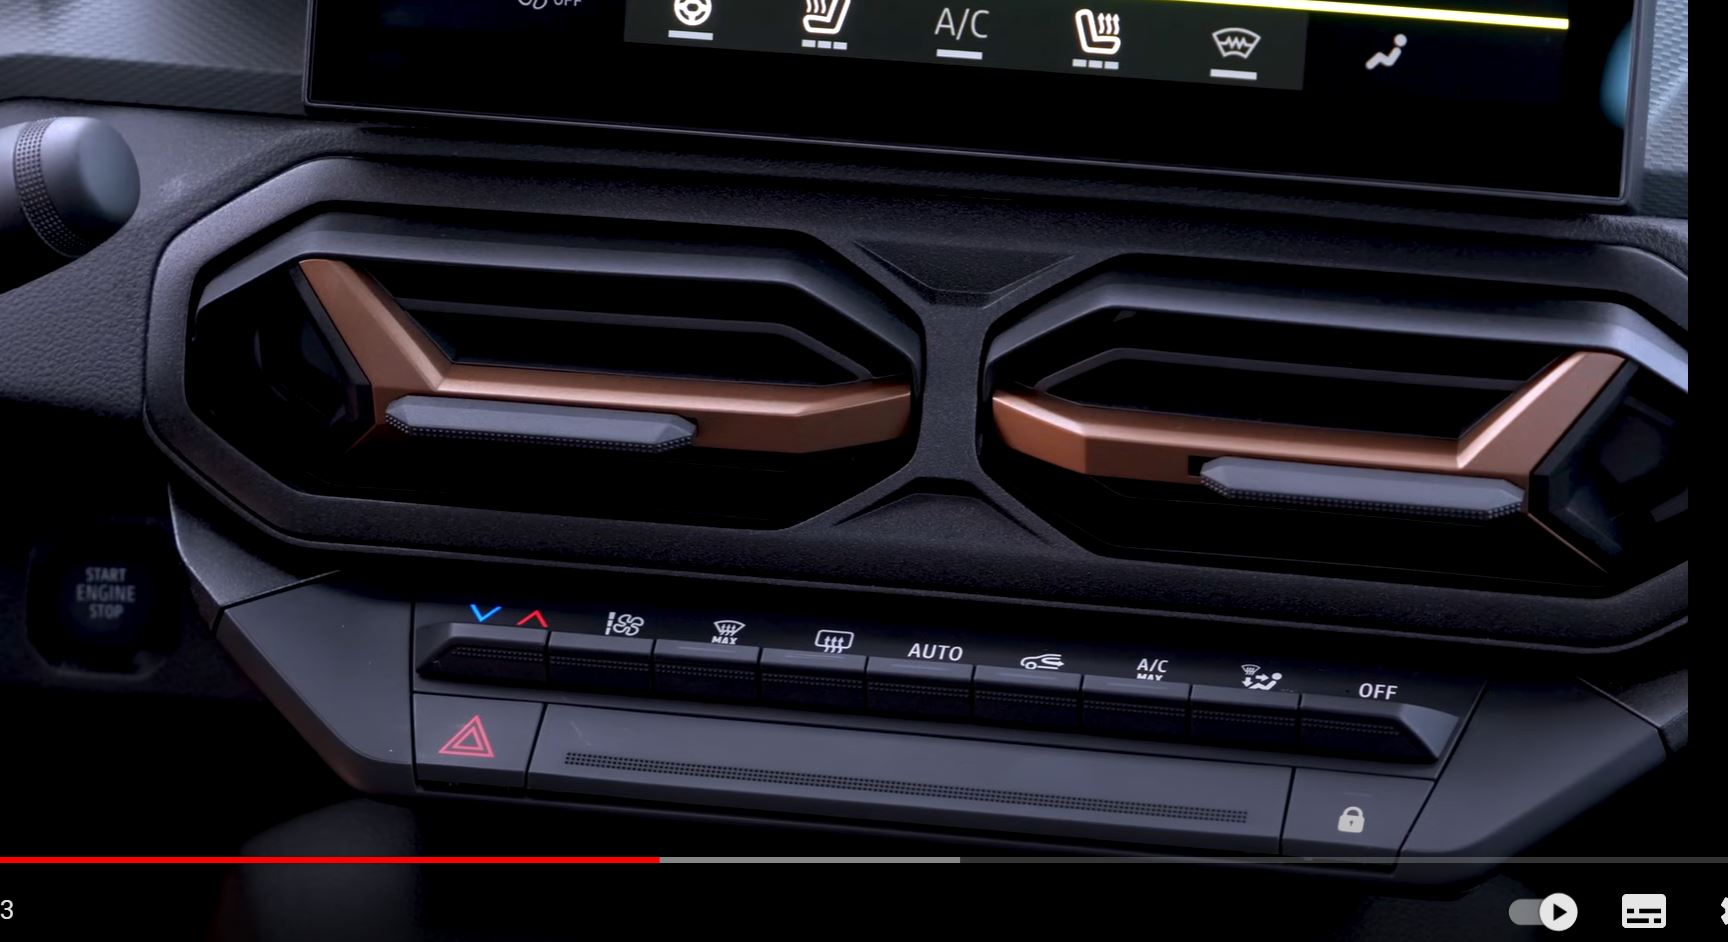 Pistonheads - The image shows a close-up view of the dashboard of a vehicle. It features several control knobs and buttons that are part of the car's infotainment system, which includes a large screen displaying what appears to be a video or a navigation interface. The color scheme of the interior is brown and black, with the dashboard having a textured appearance.